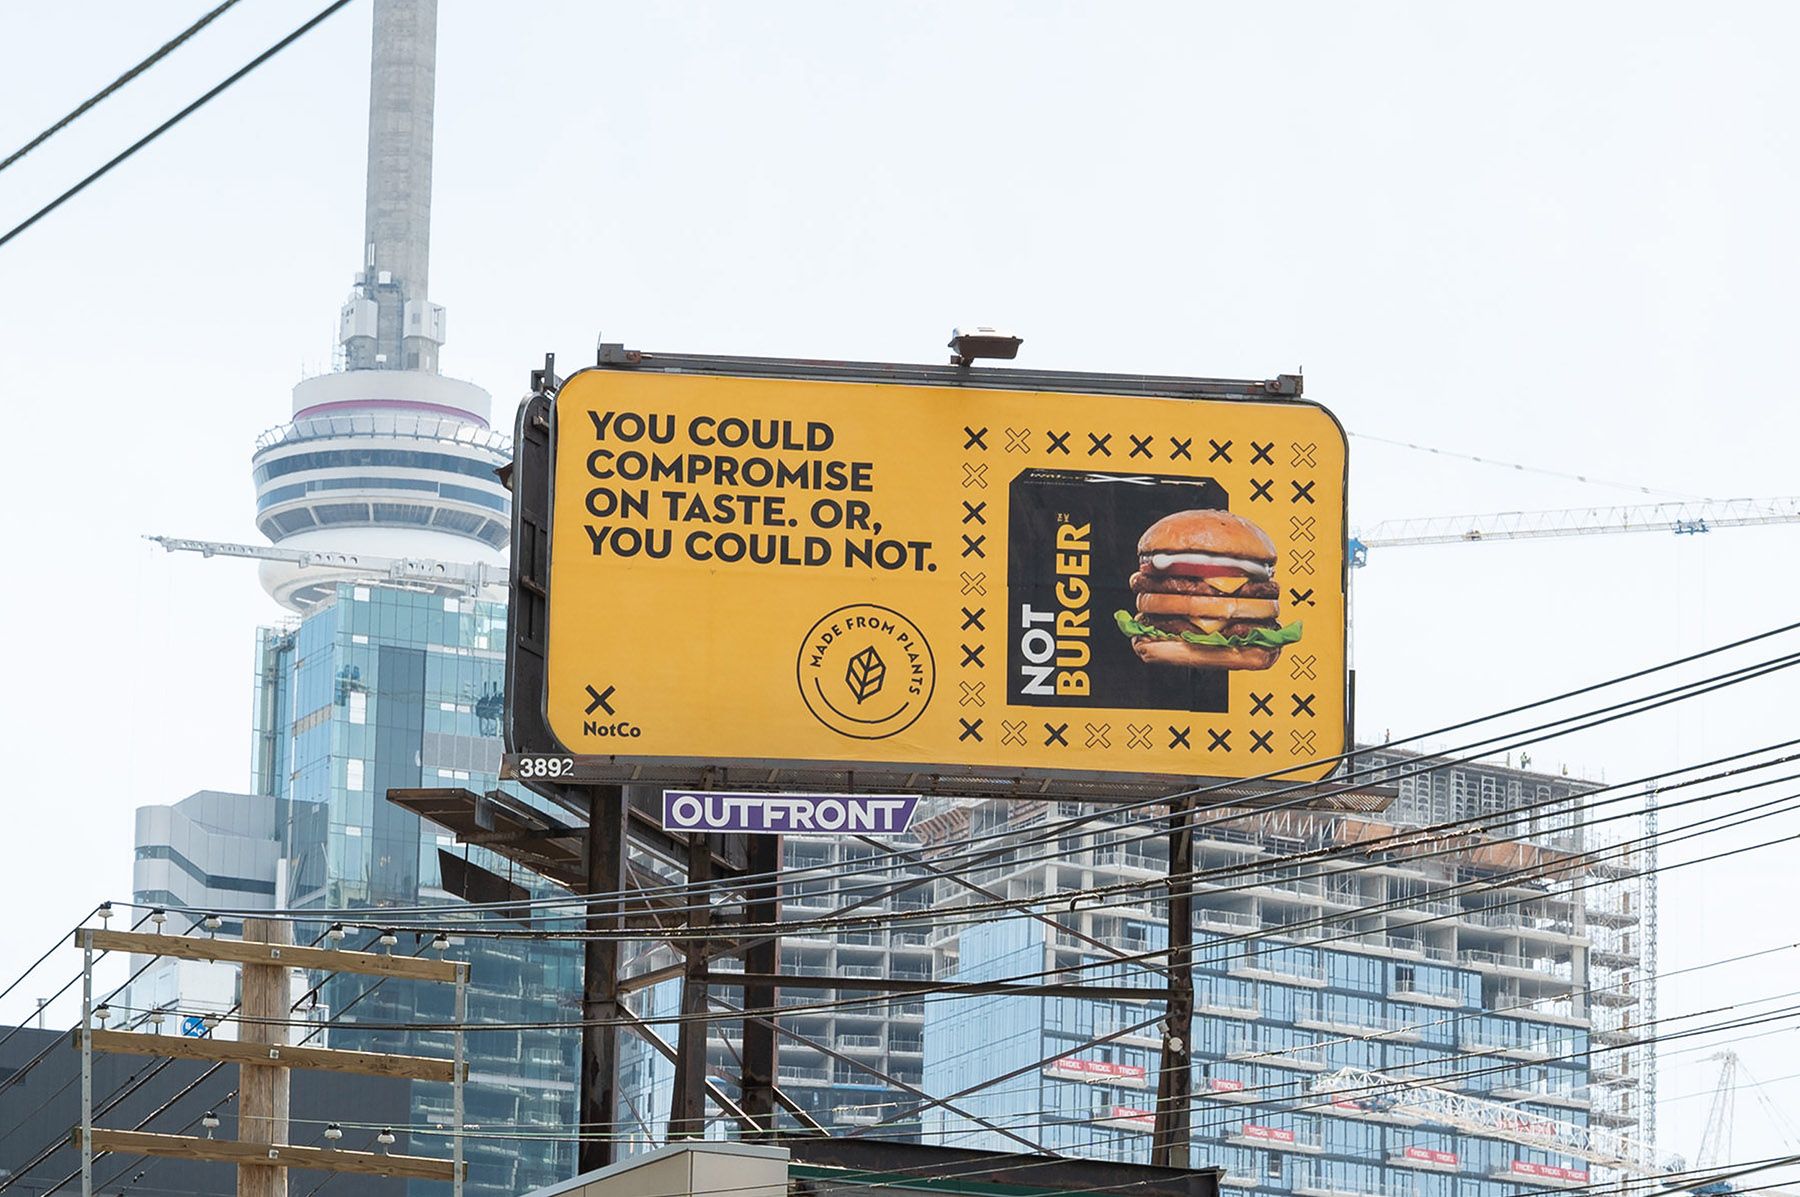 A NotBurger billboard in front of the CN Tower